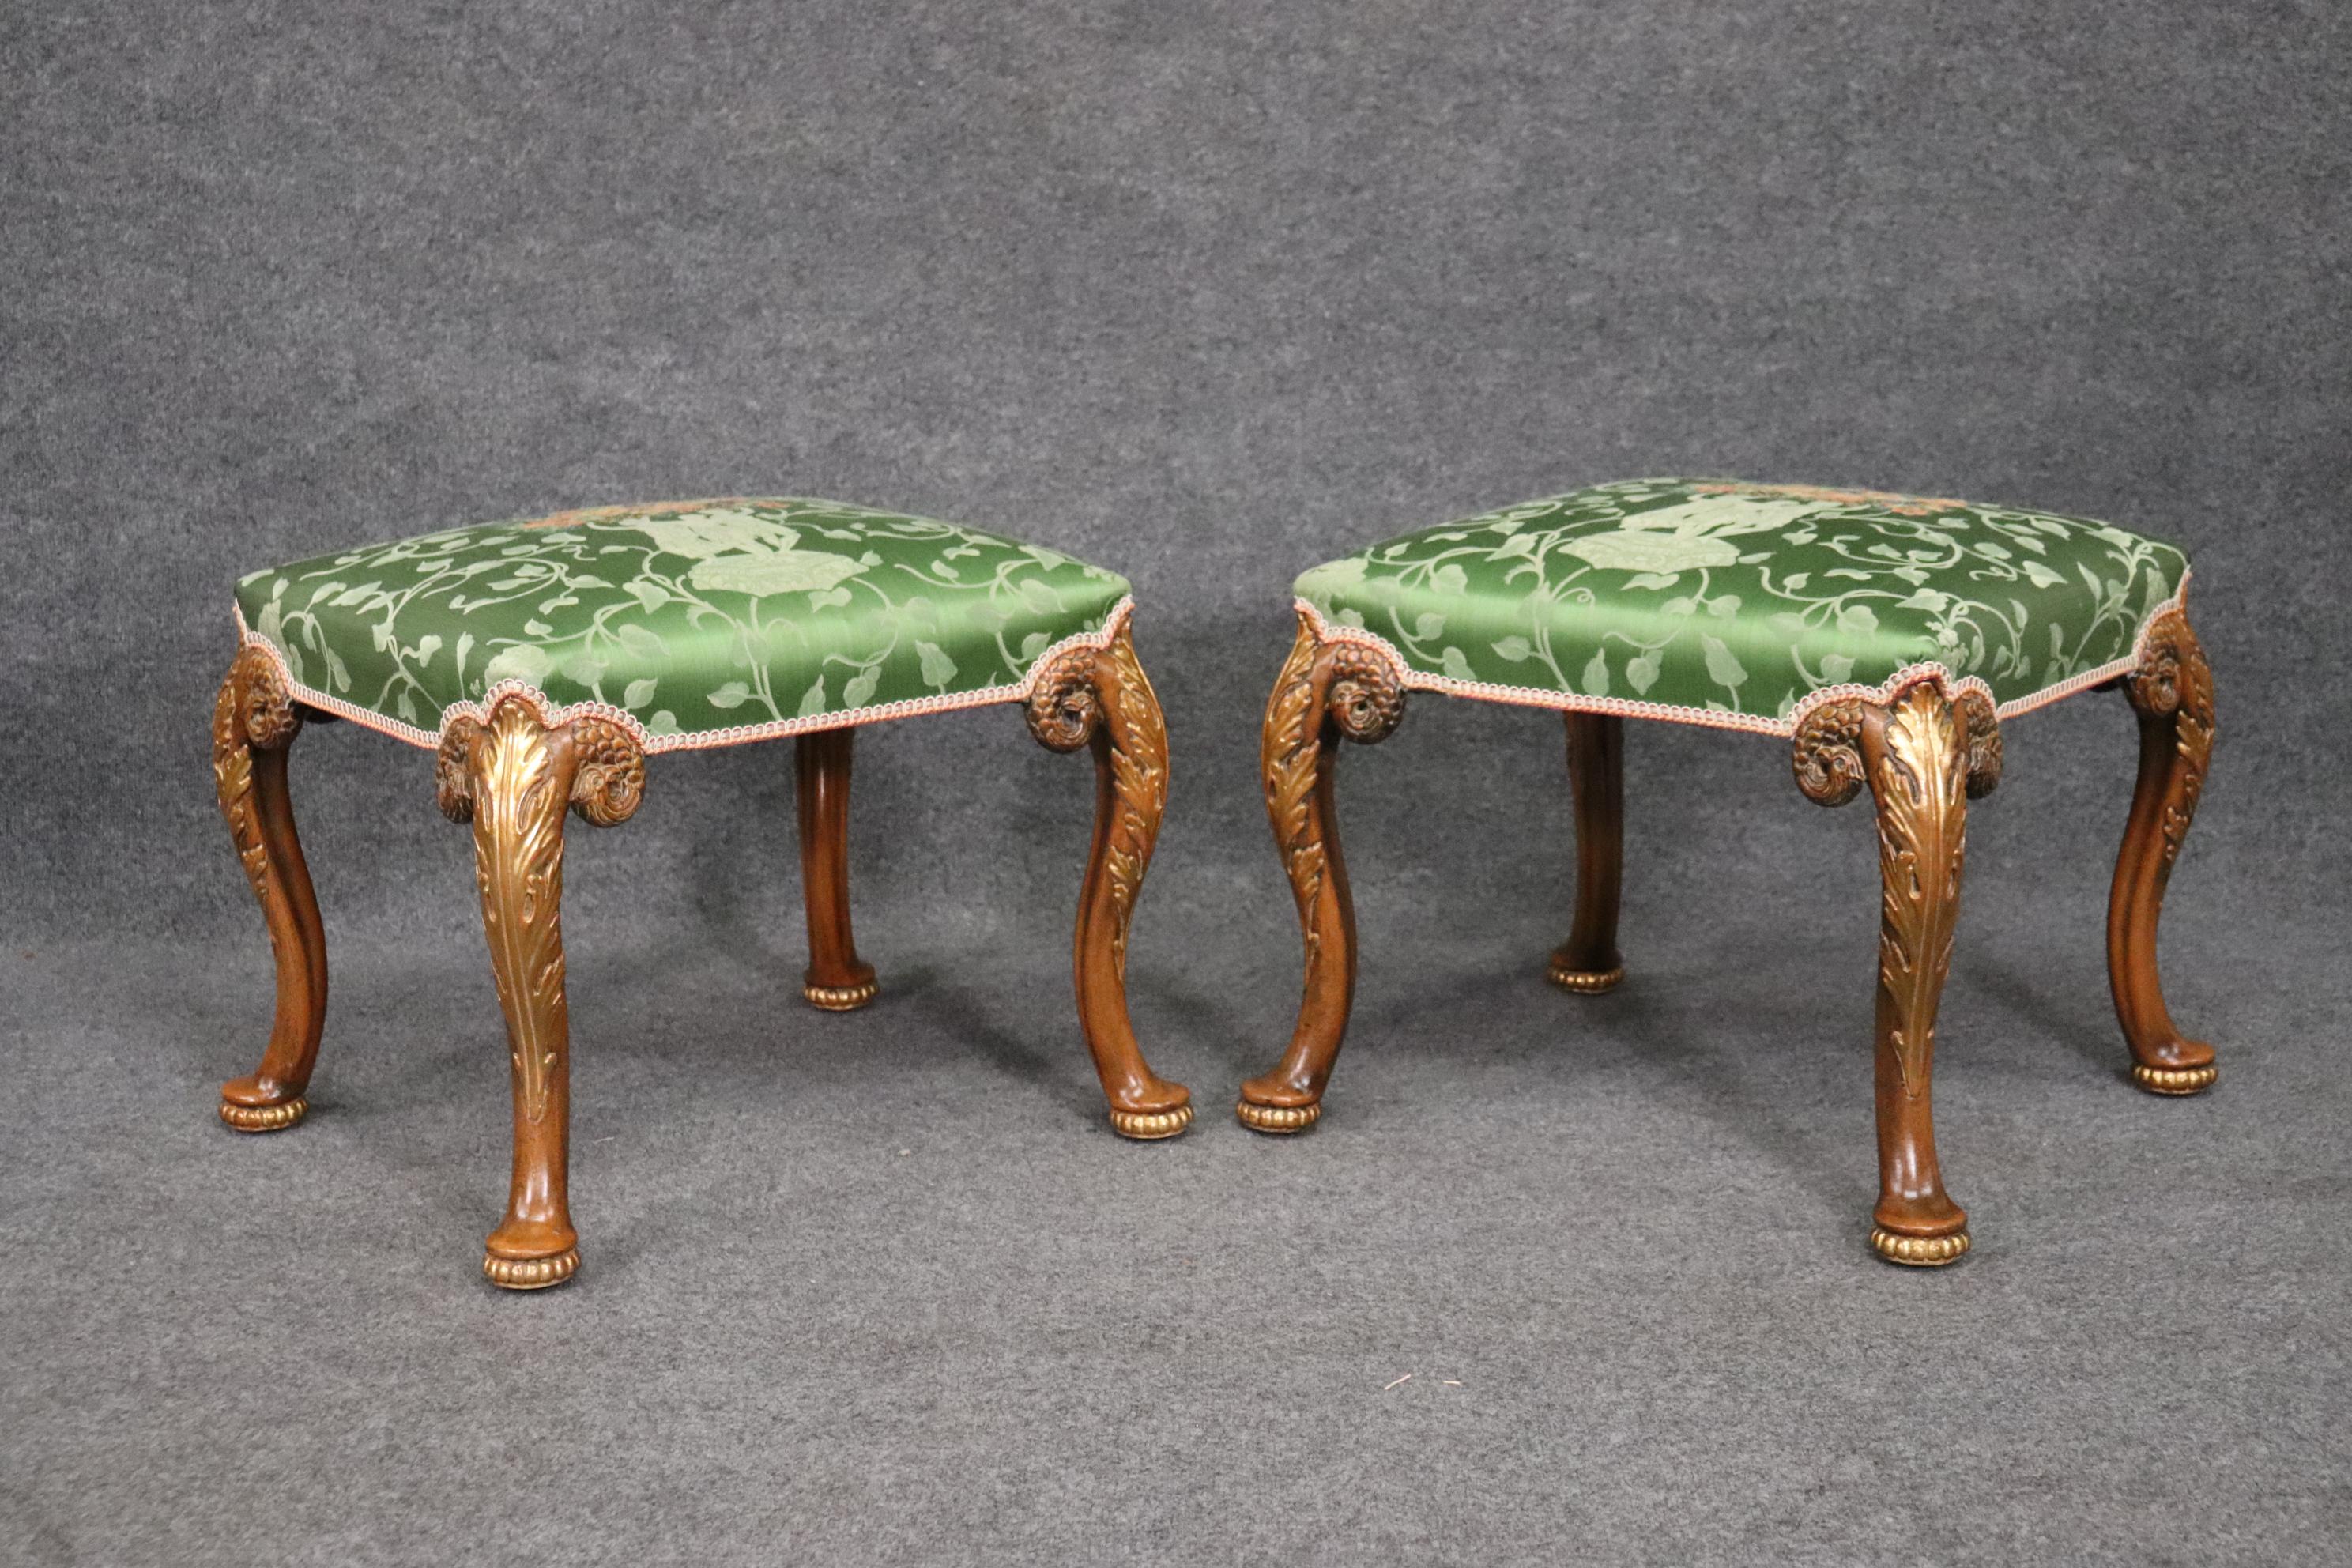 This is a gorgeous, absolutely decadent pair of Georgian style foot stools from the 1920s. The upholstery is in good original condition and probably not original. It appears to be silk and have a figural theme. The stools measure 23 x 19 tall x 20